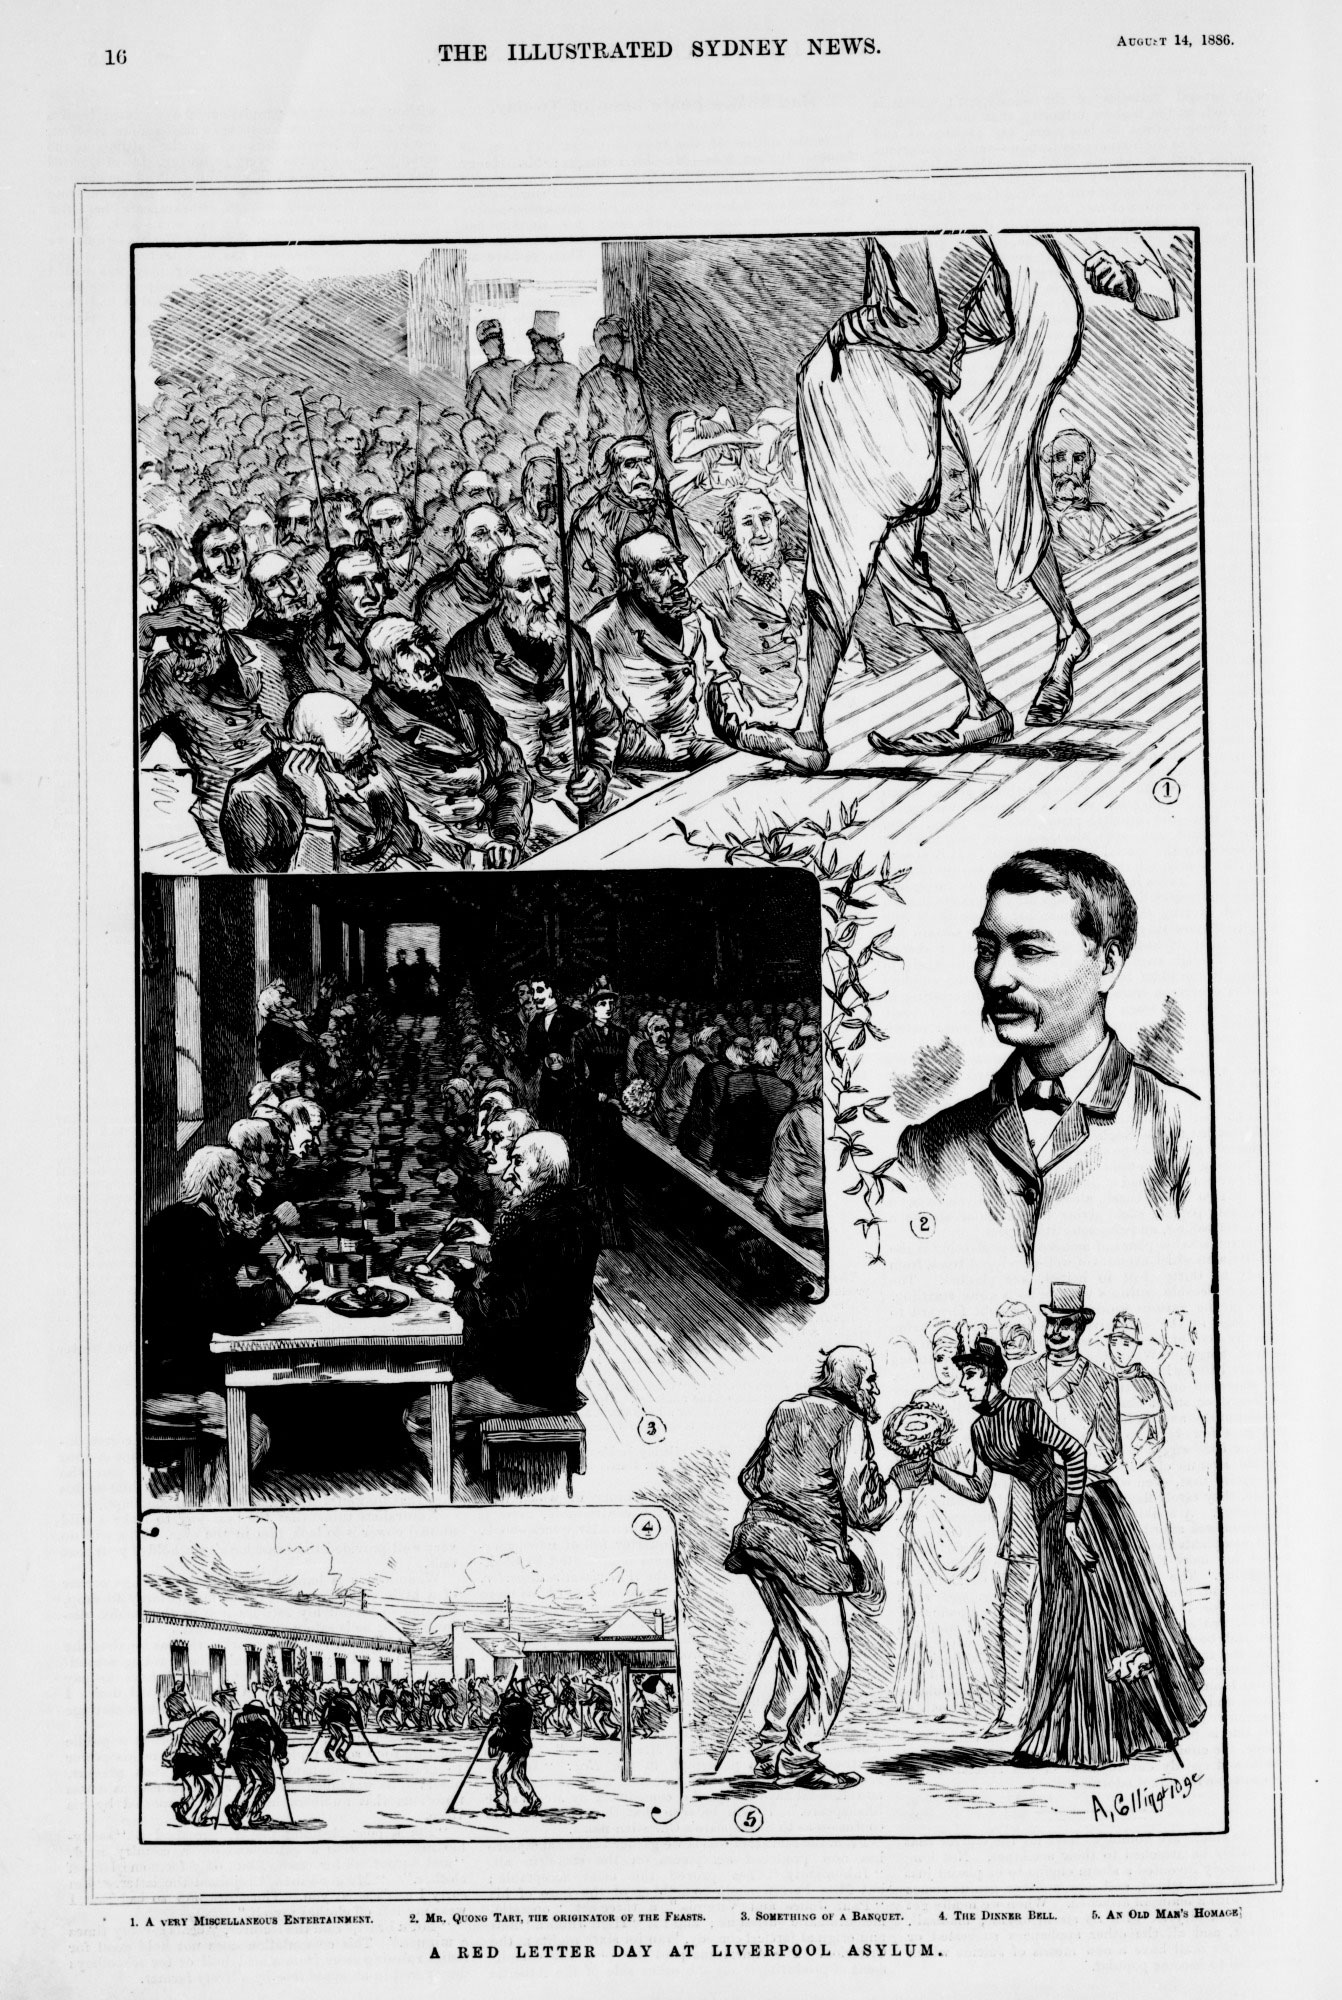 ‘A Red Letter Day at Liverpool Asylum’, Illustrated Sydney News, 14 August 1886